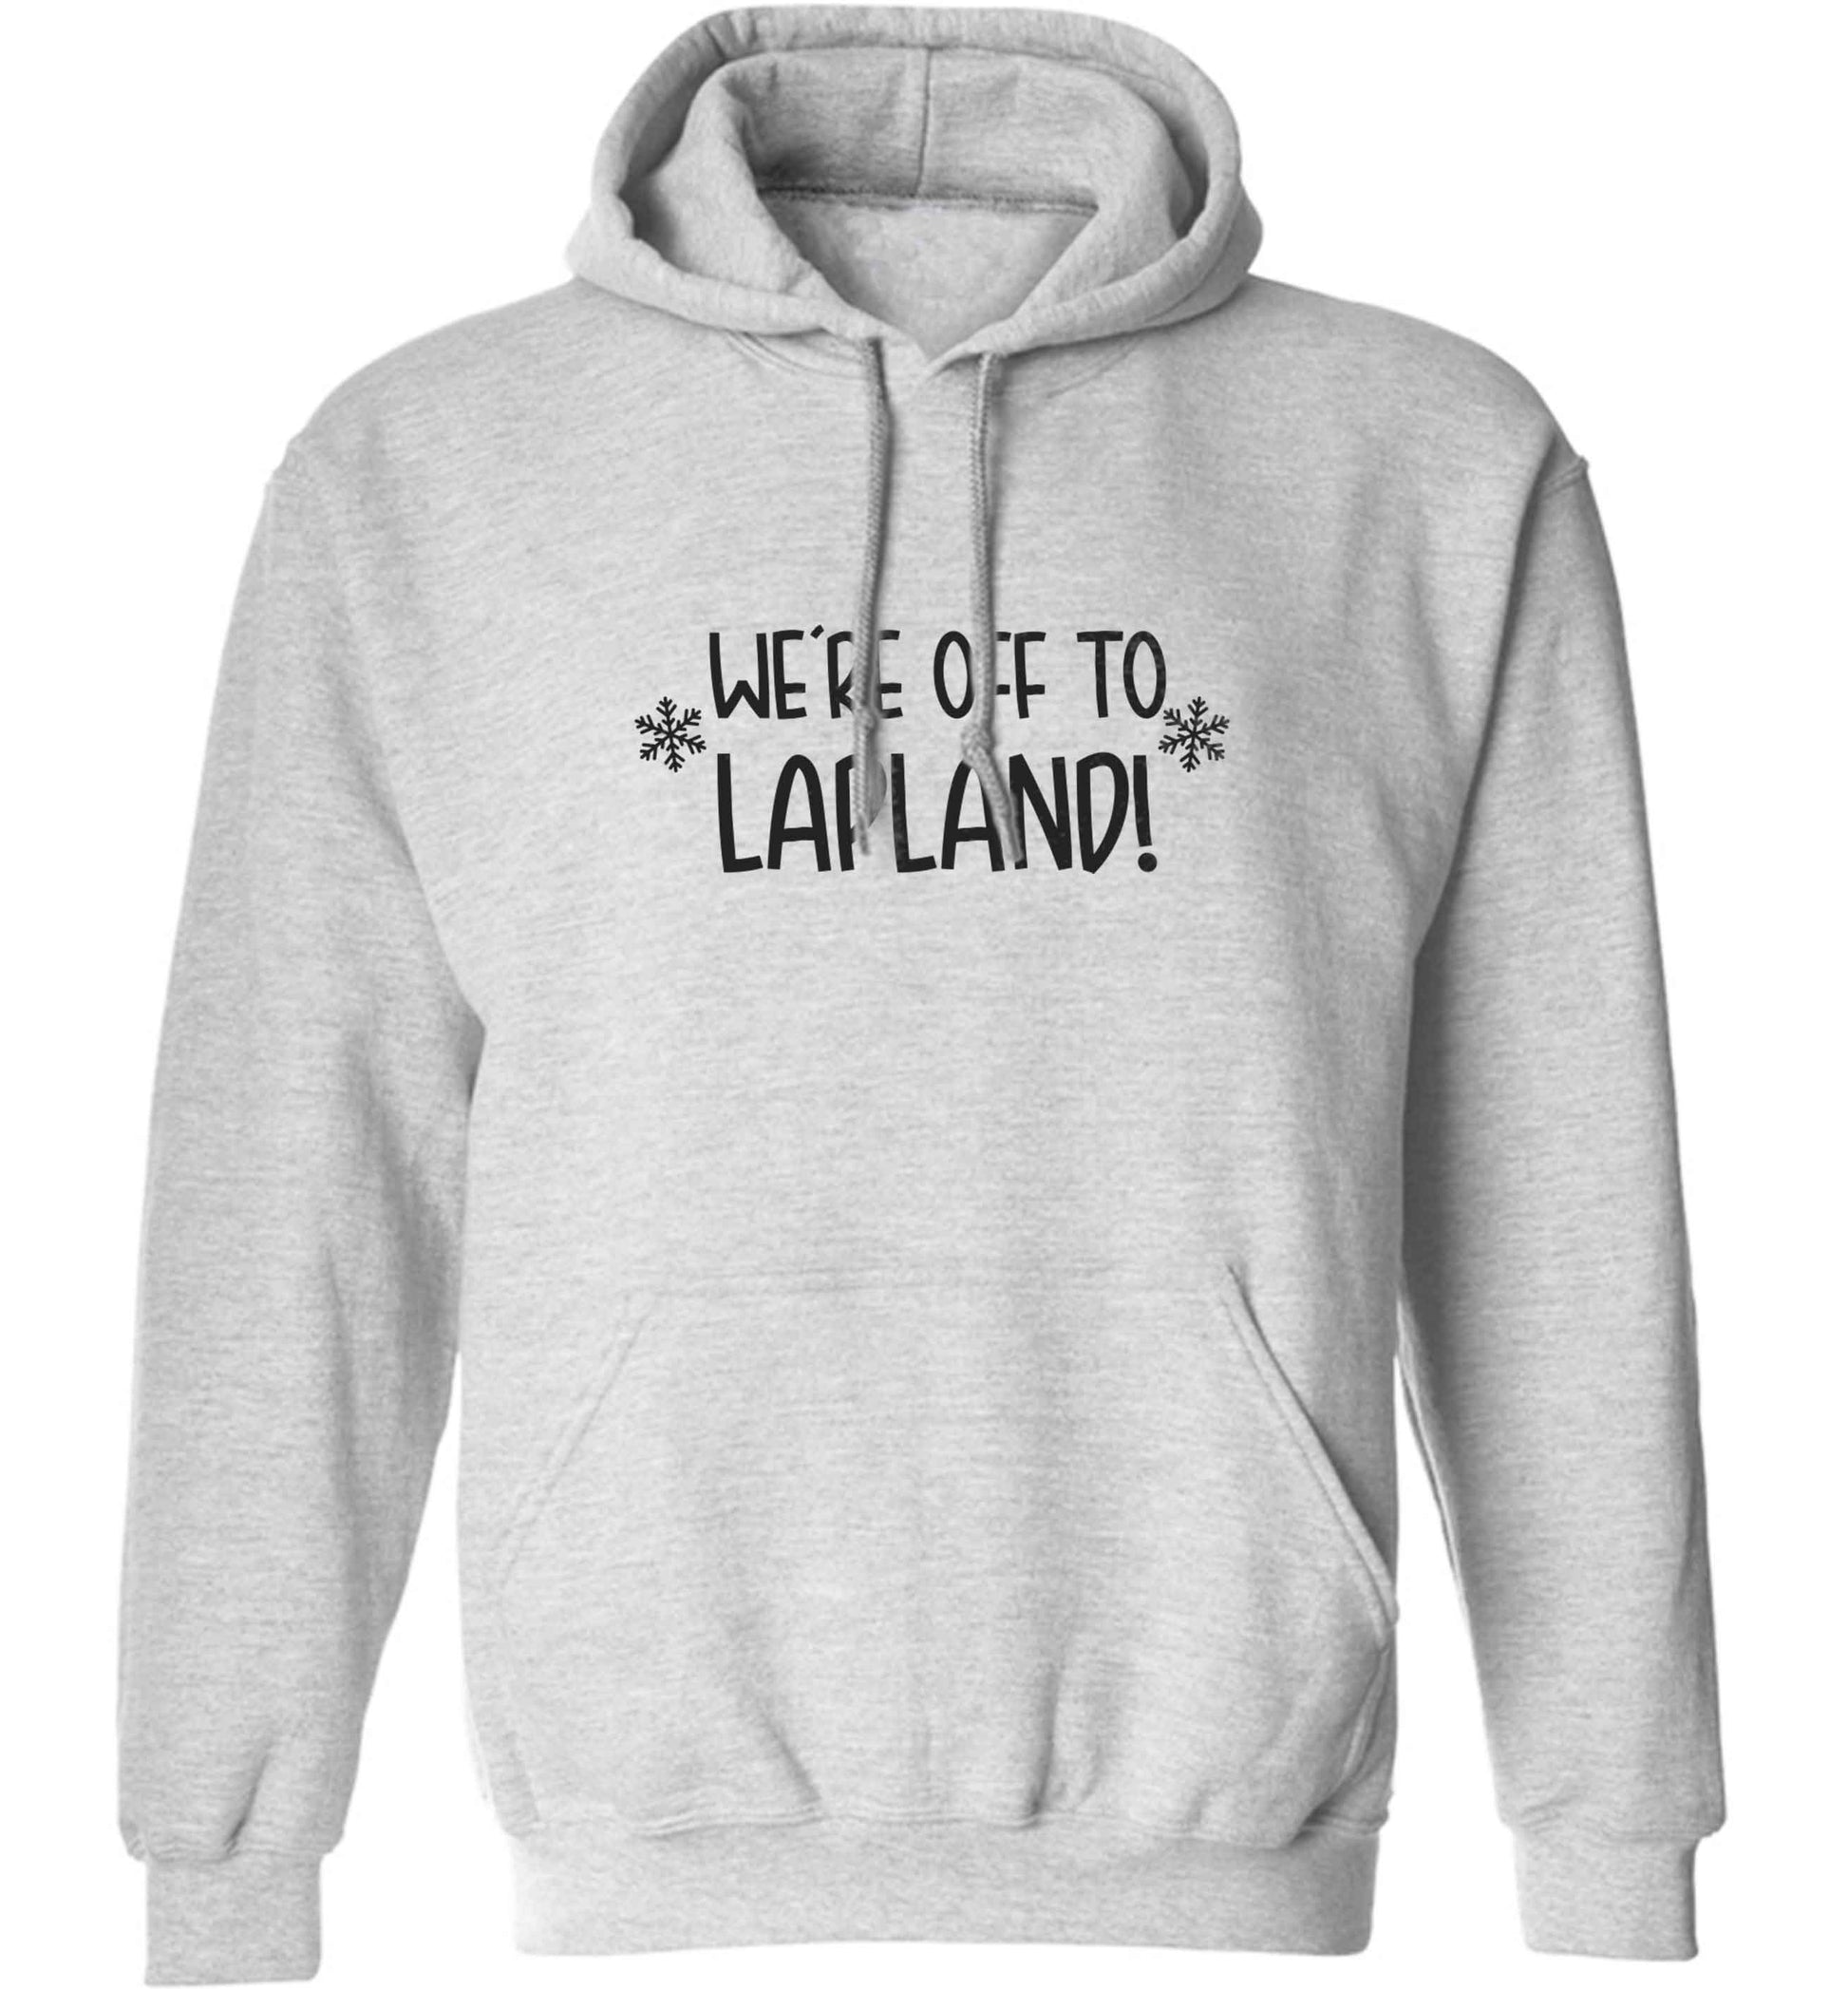 We're off to Lapland adults unisex grey hoodie 2XL